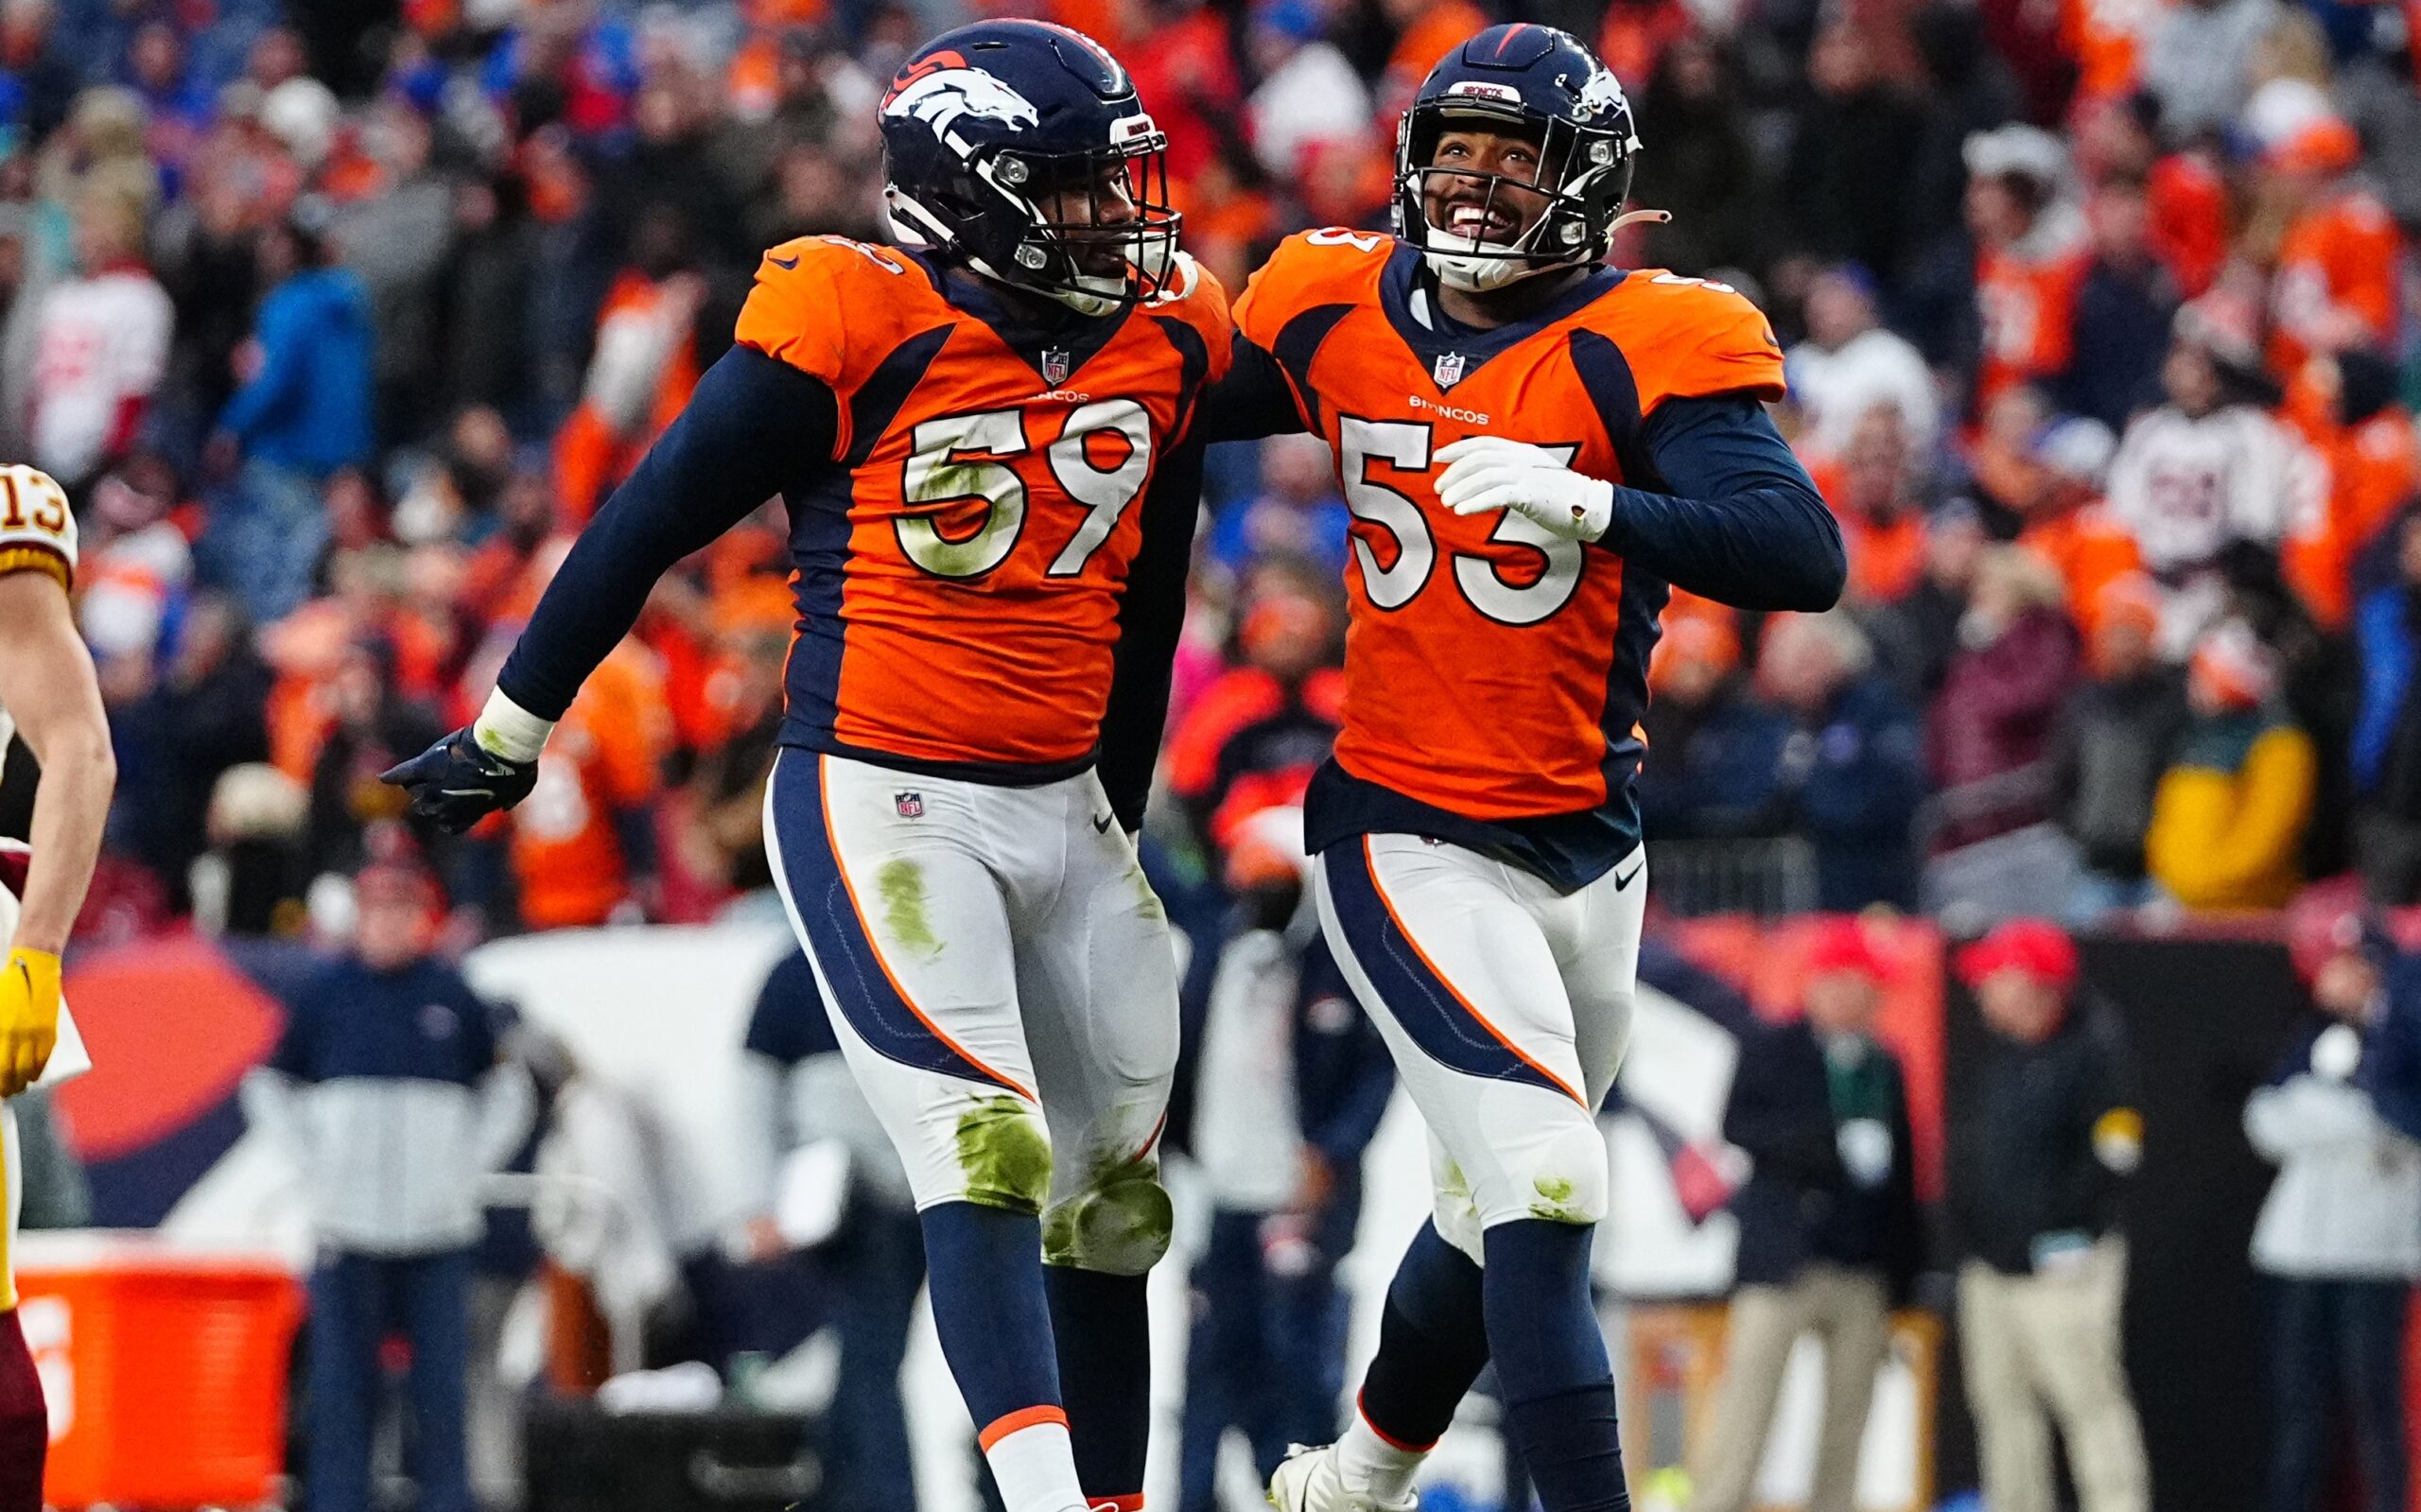 Denver Broncos edge rusher Malik Reed excited for competition